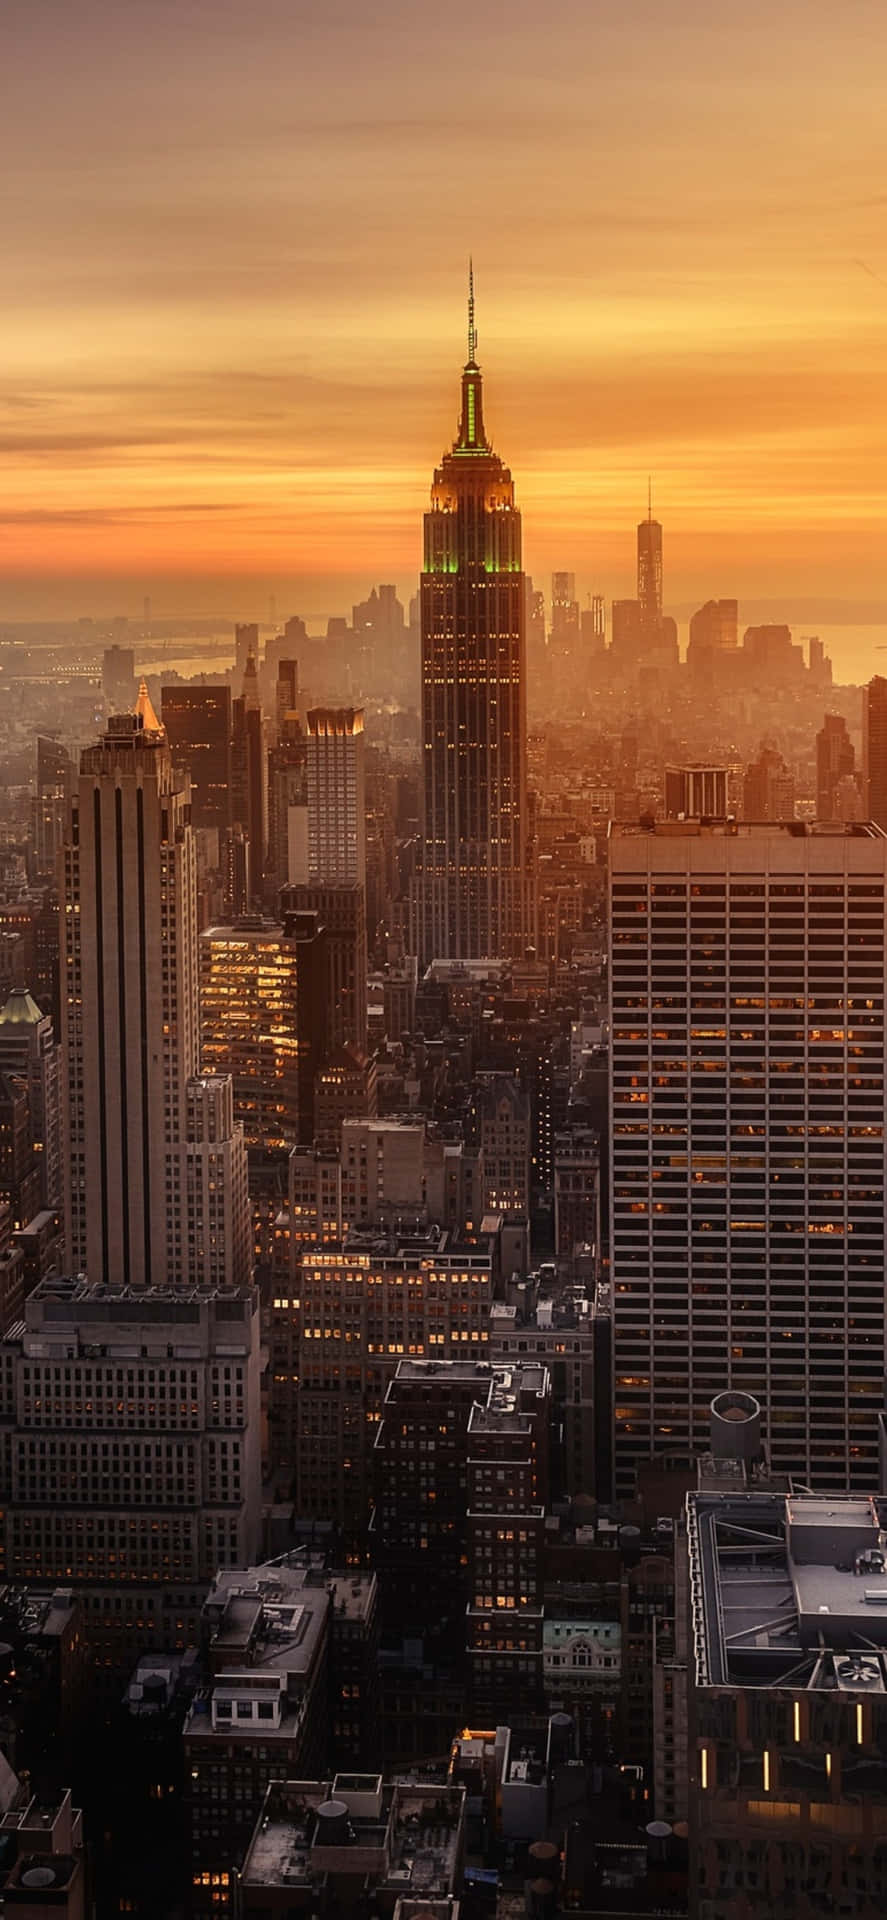 iPhone X Ny City Empire State Building-solnedgang baggrund.